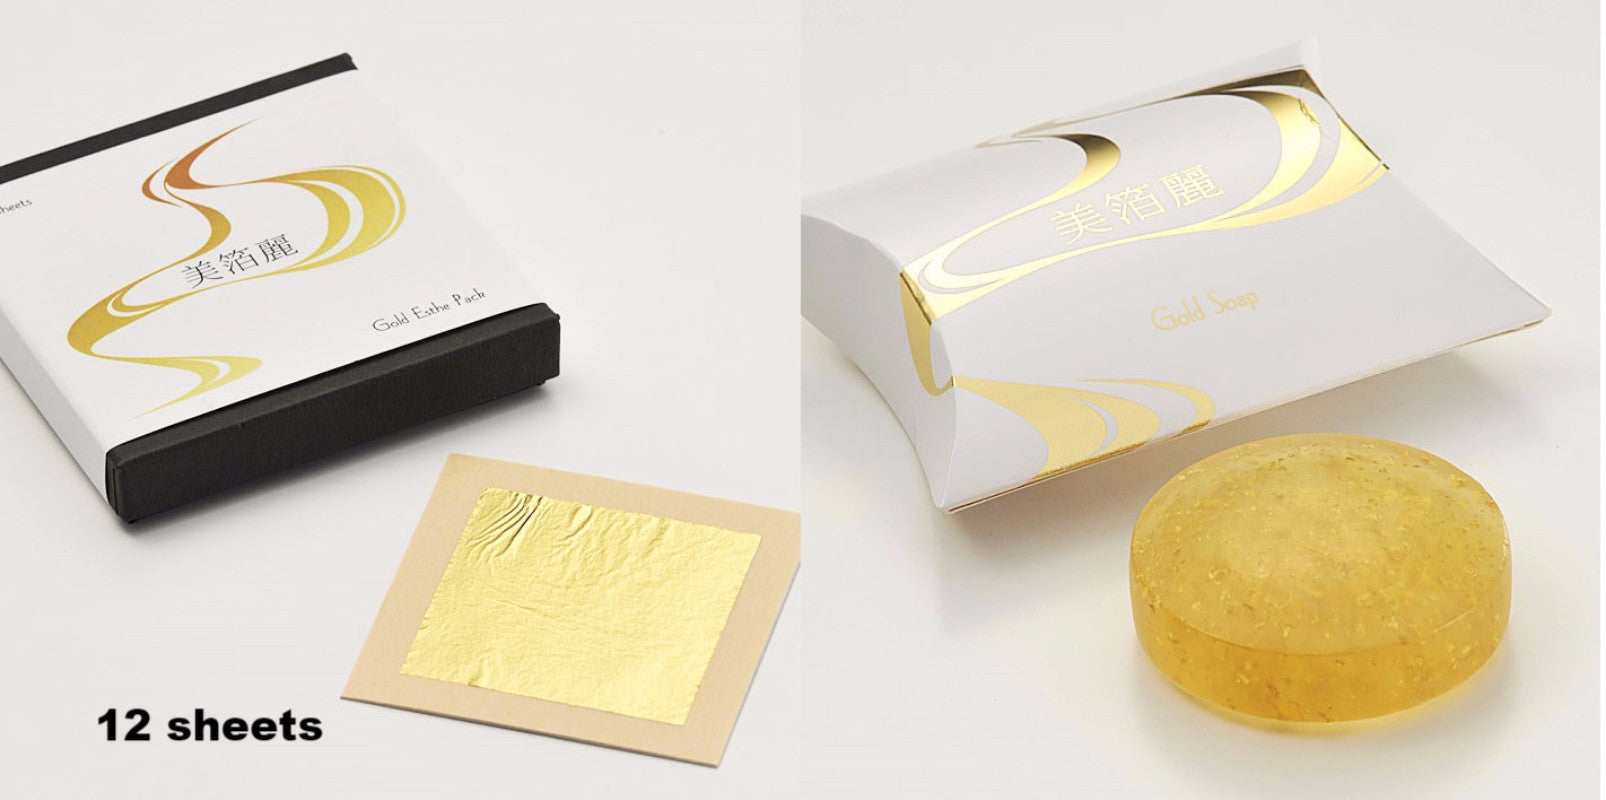 Gold Facial Soap 1 piece (30 g) & Gold Aesthetic Leaf (12 sheets) set - JAPANESE GIFTS 